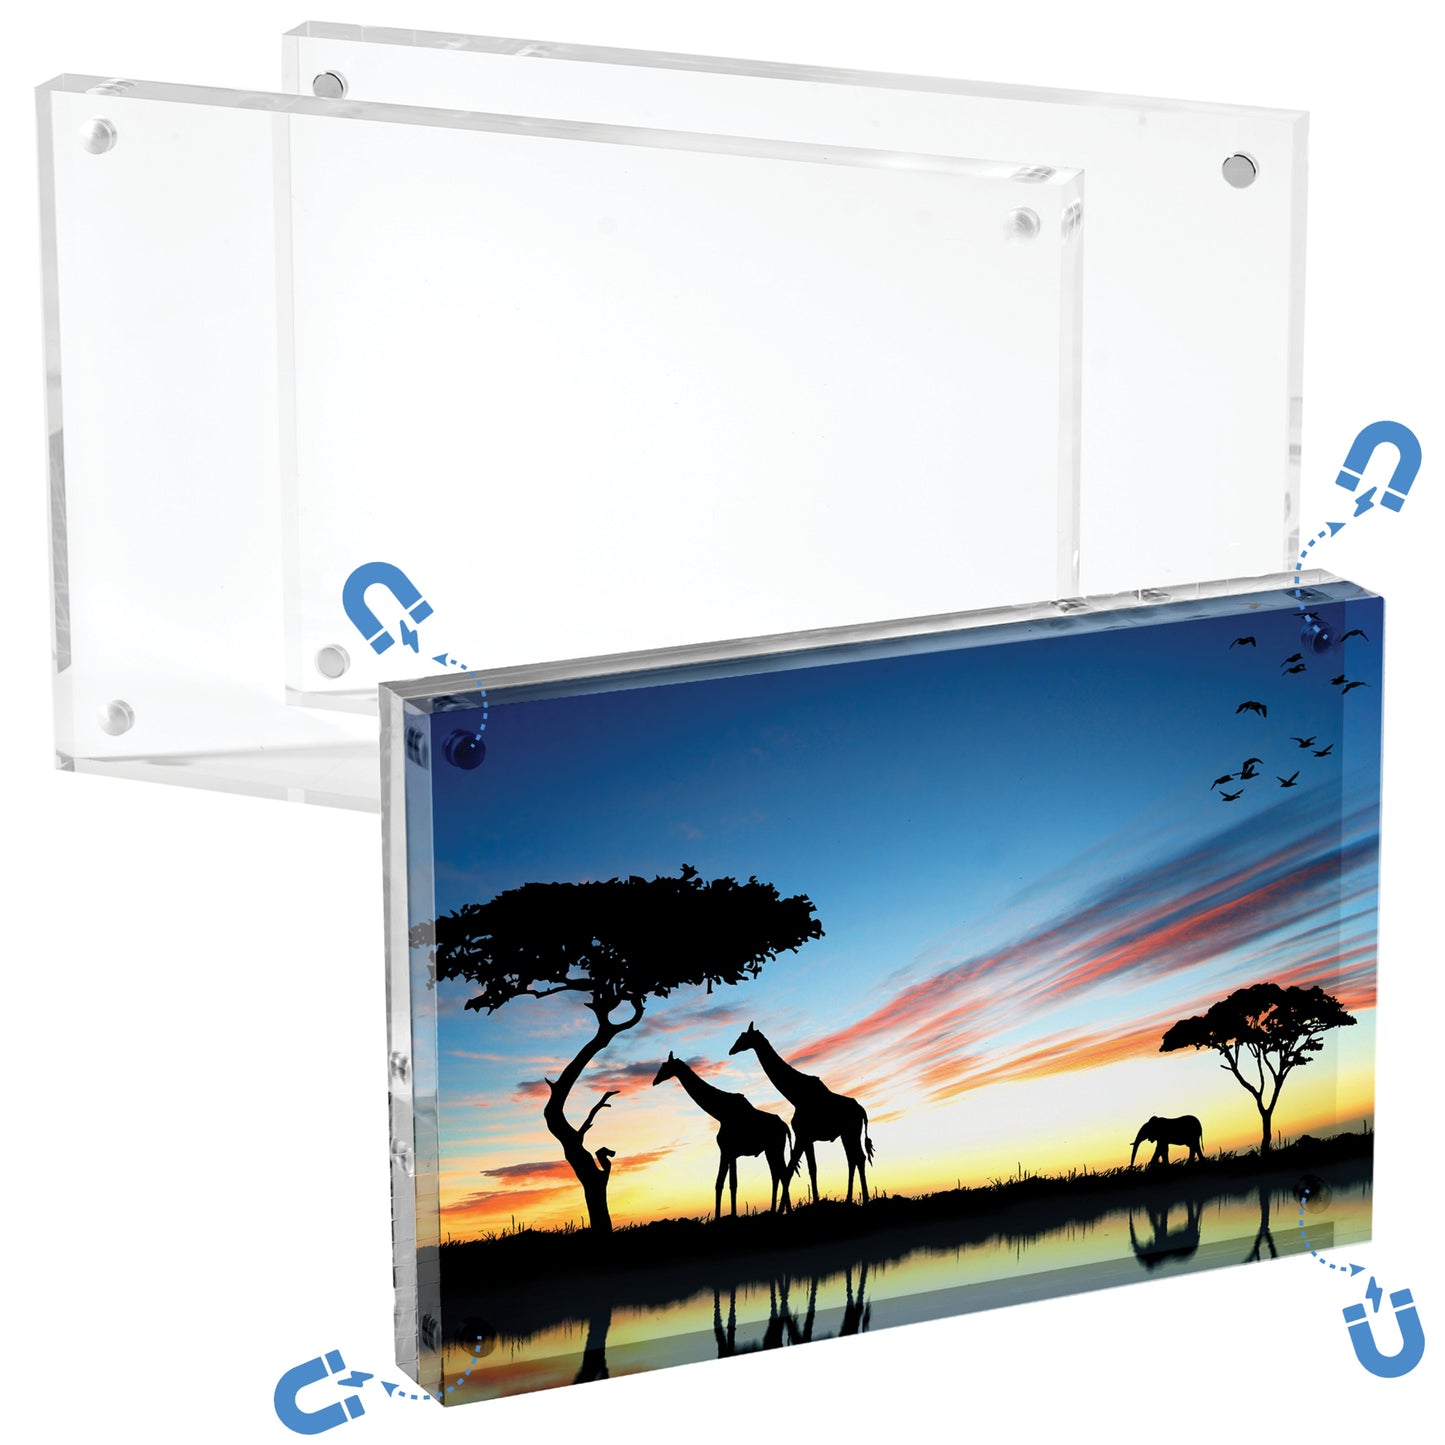 4"x6" Double-Sided Acrylic Magnetic Picture Frame